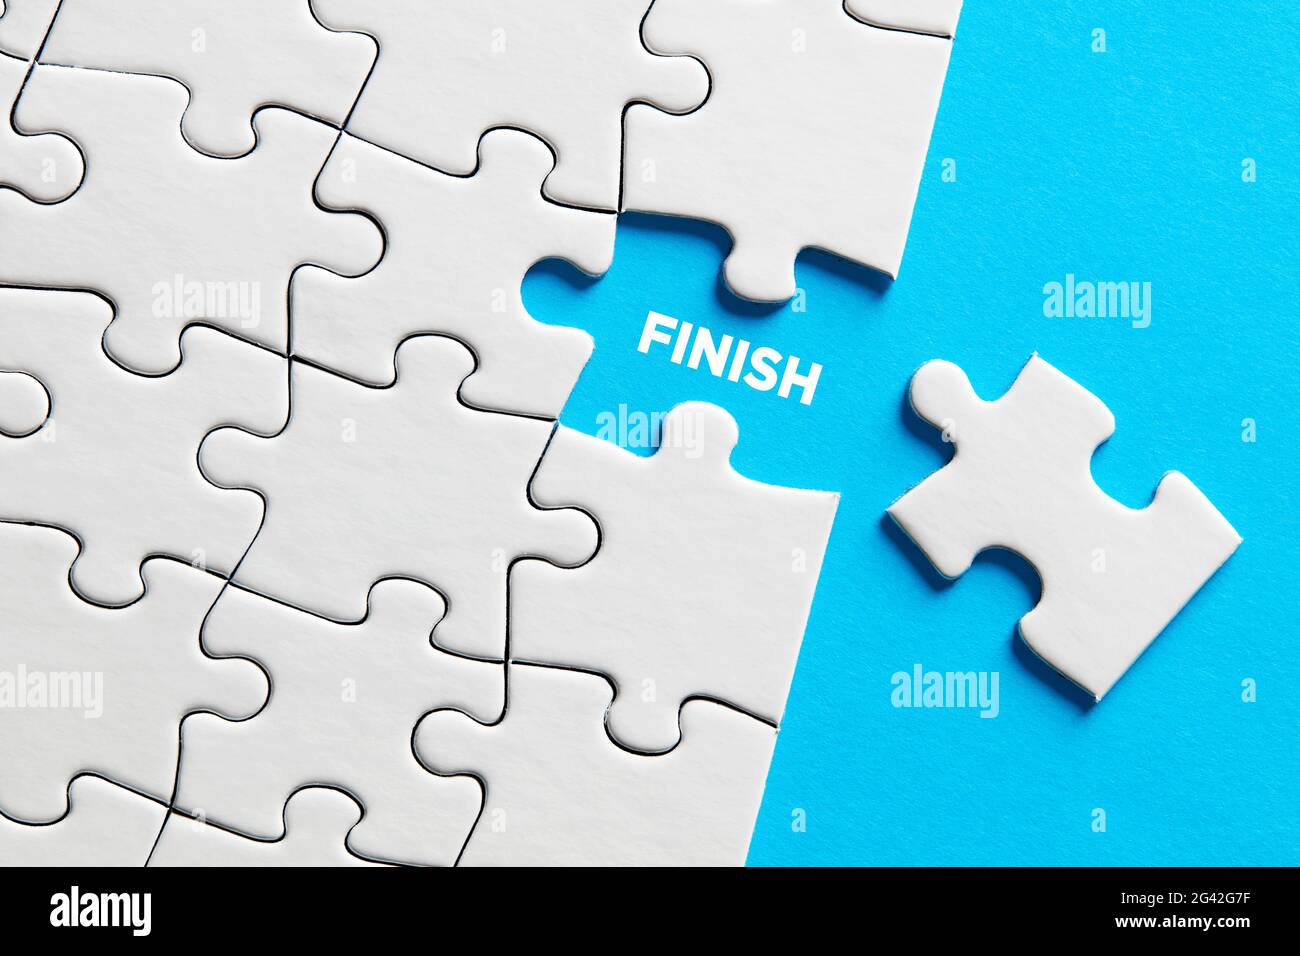 The word finish on missing puzzle piece. To finish or complete a task concept. Stock Photo